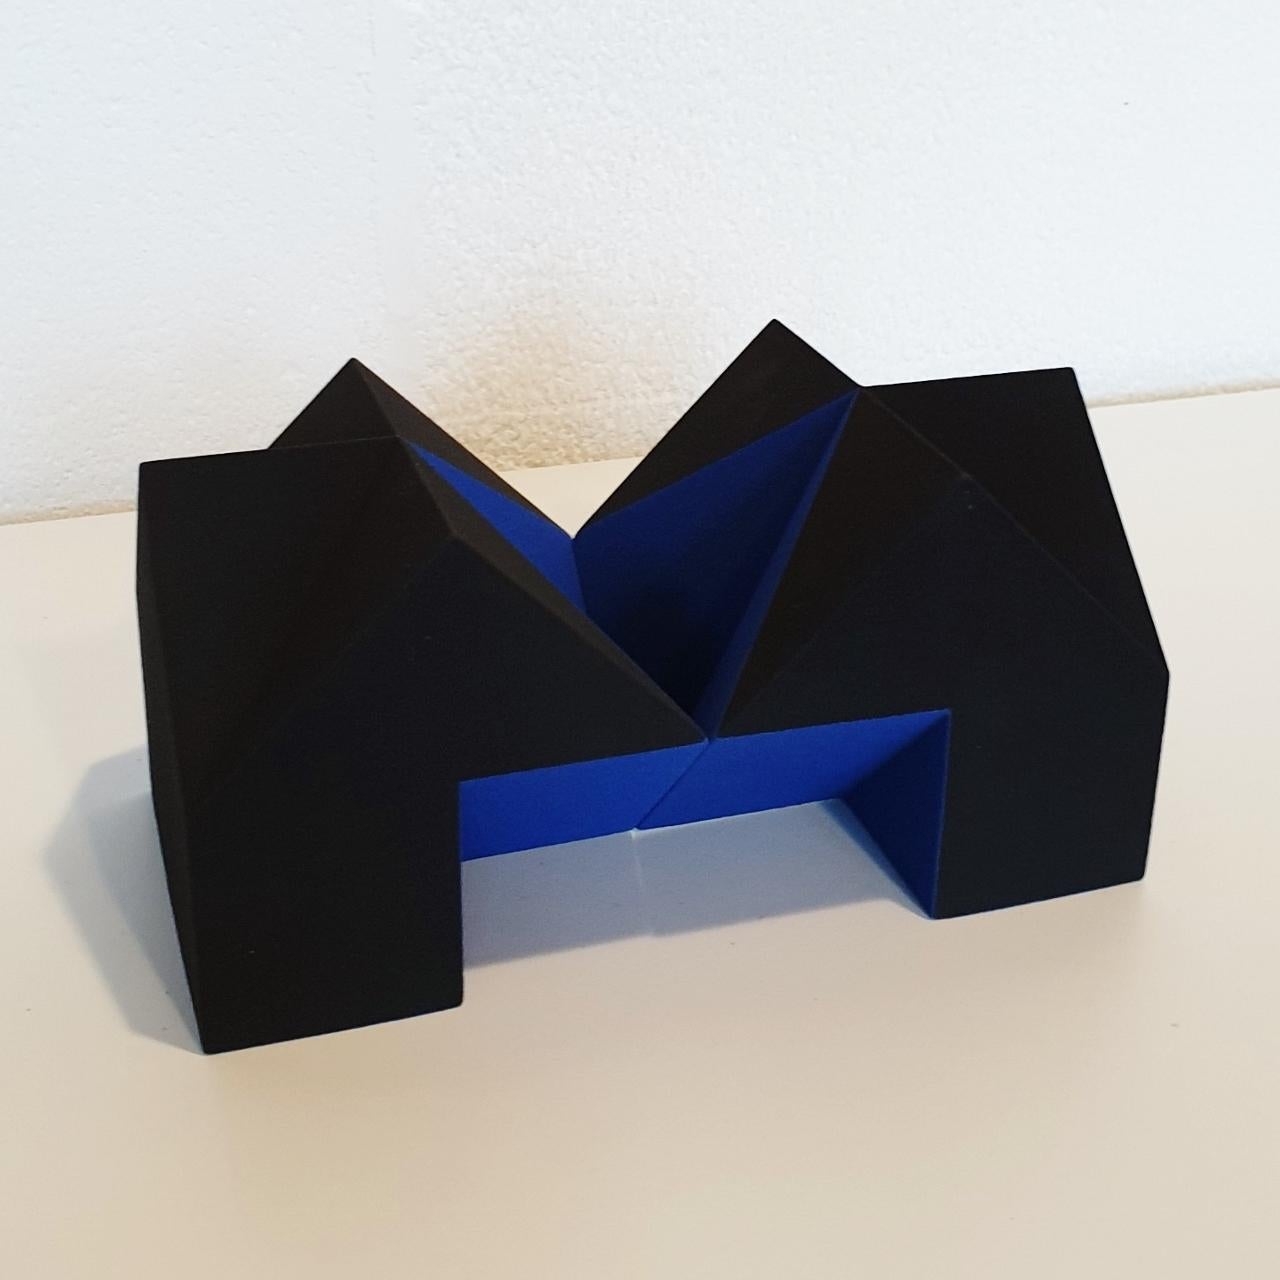 SC1403 blue - contemporary modern abstract geometric ceramic object sculpture